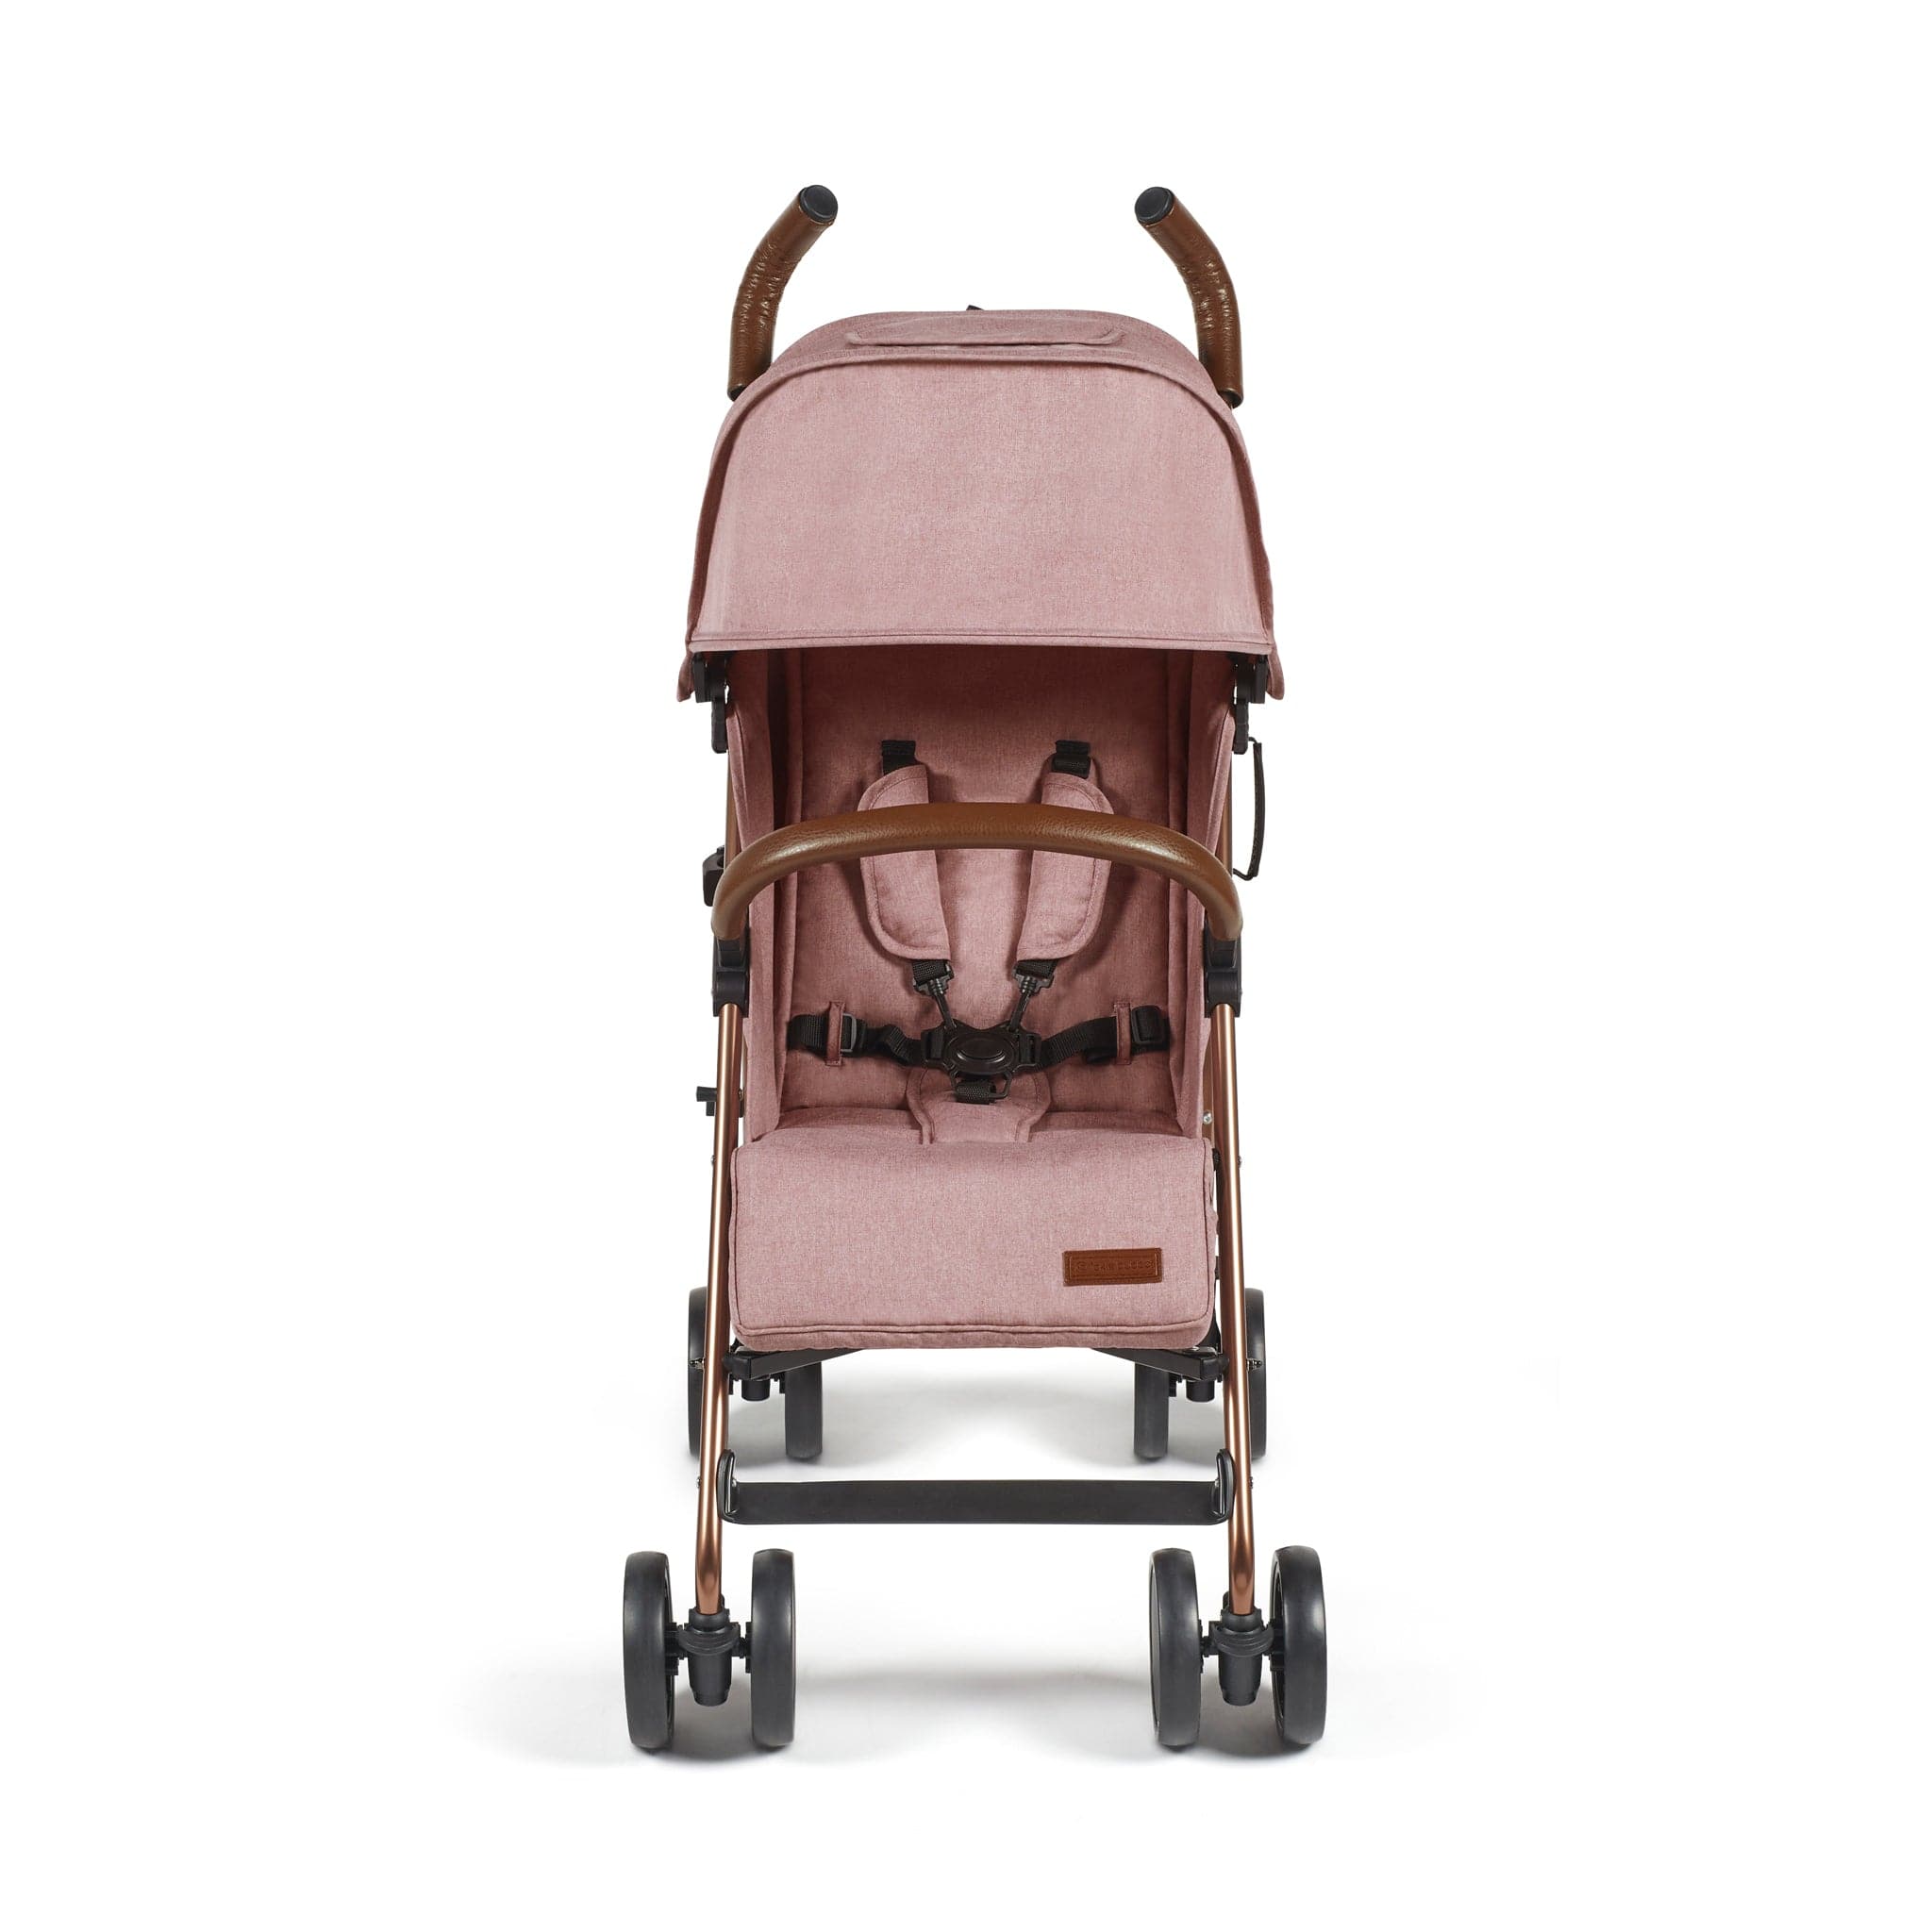 Ickle Bubba baby pushchairs Ickle Bubba Discovery Pushchair Dusky Pink/Rose Gold 15-002-100-121